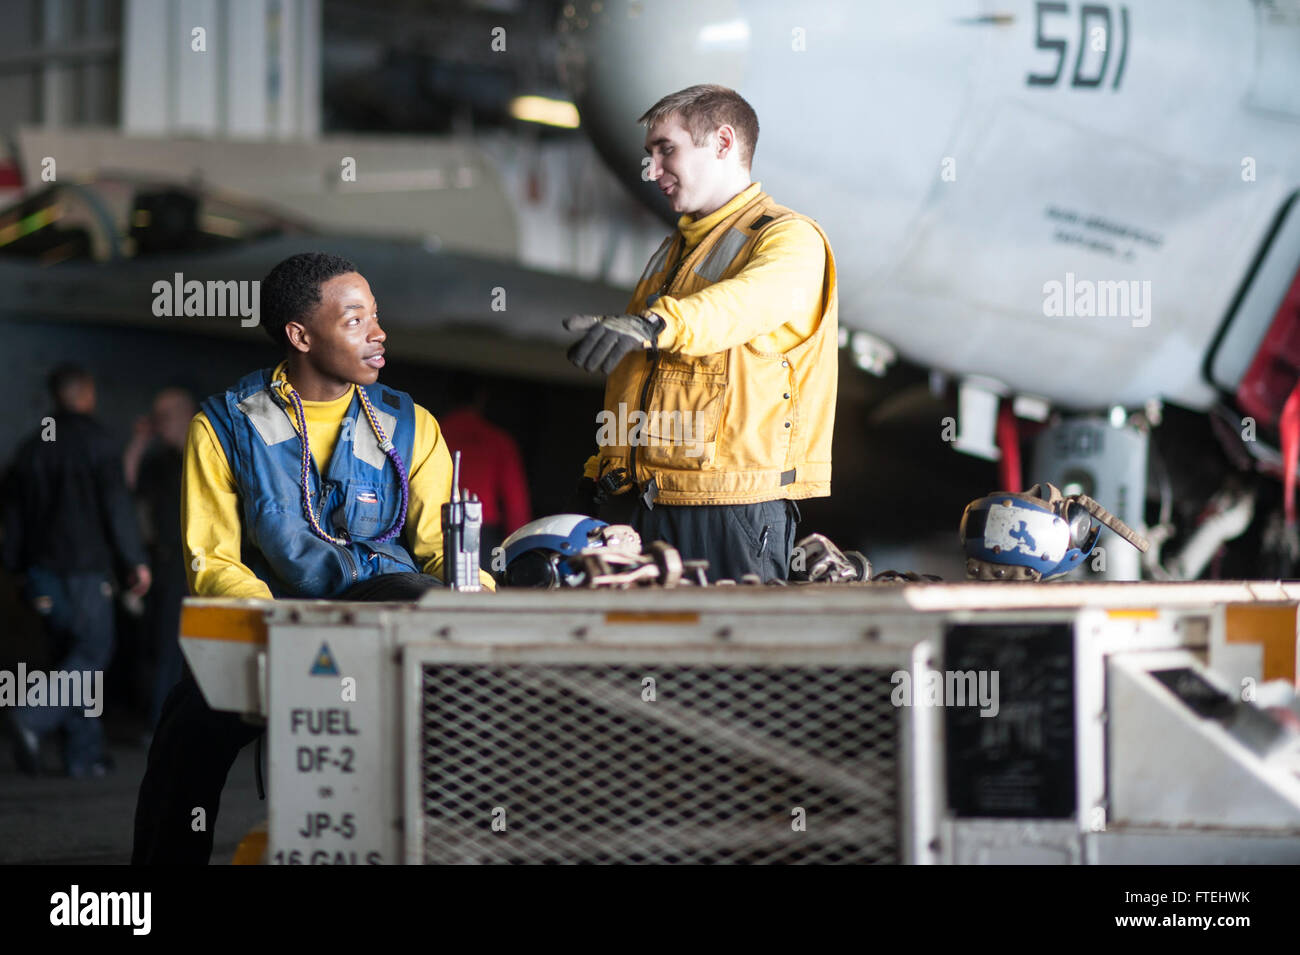 MEDITERRANEAN SEA (Oct. 29, 2014) Aviation Boatswain’s Mate (Handling) Airman Edric Ruffin, from Cleburne, Texas, left, and Aviation Boatswain’s Mate (Handling) Airman Jak Kester, from Orting, Wash., move aircraft in the hangar bay aboard the aircraft carrier USS George H.W. Bush (CVN 77). George H.W. Bush, homeported in Norfolk, Va., is conducting naval operations in the U.S. 6th Fleet area of operations in support of U.S. national security interests in Europe. Stock Photo